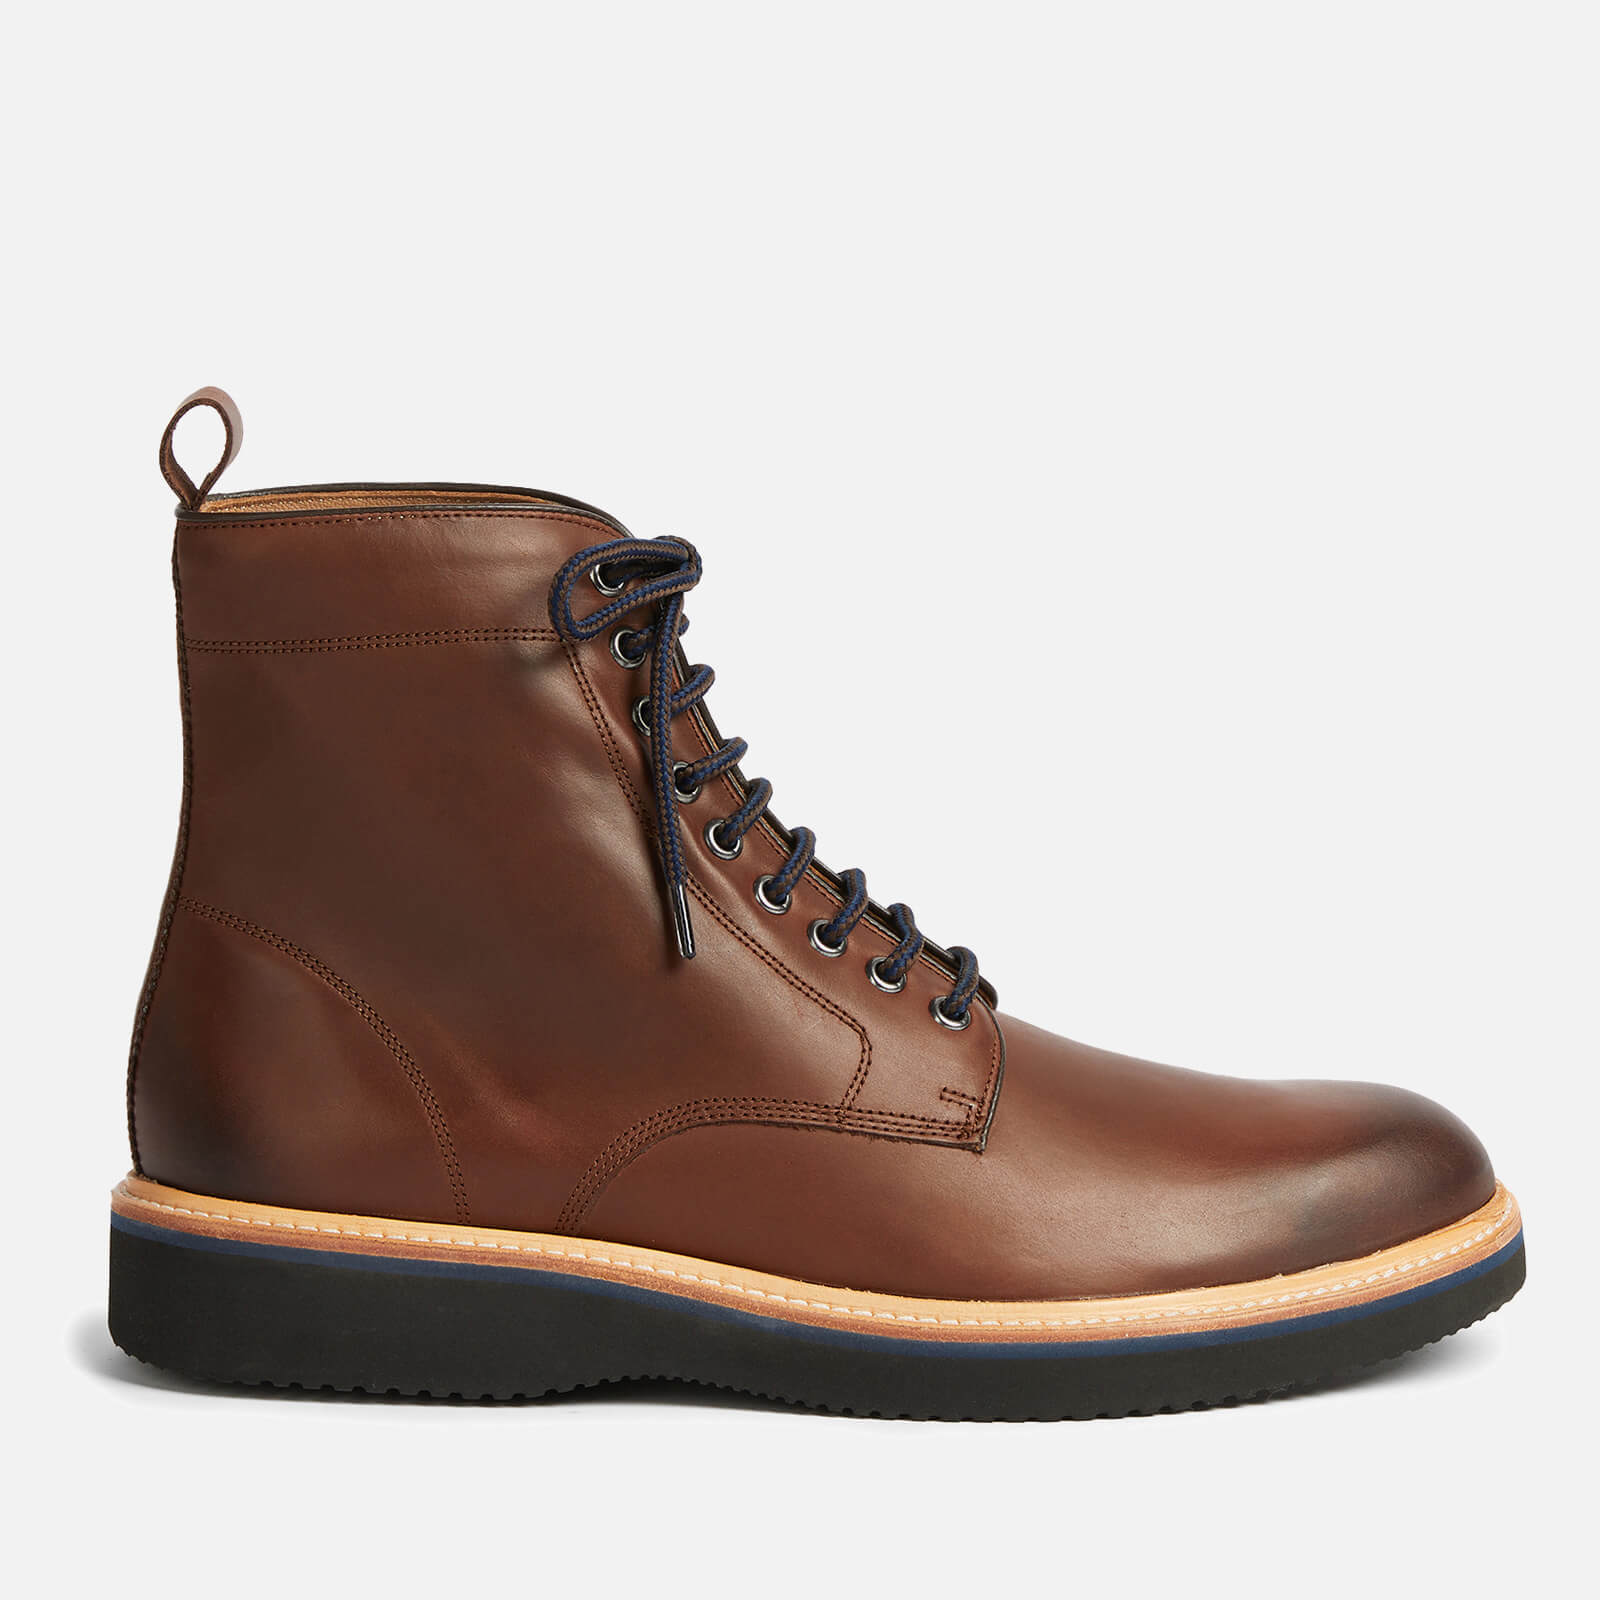 Ted Baker Men's Linton Leather Lace Up Boots - Brown - Uk 8